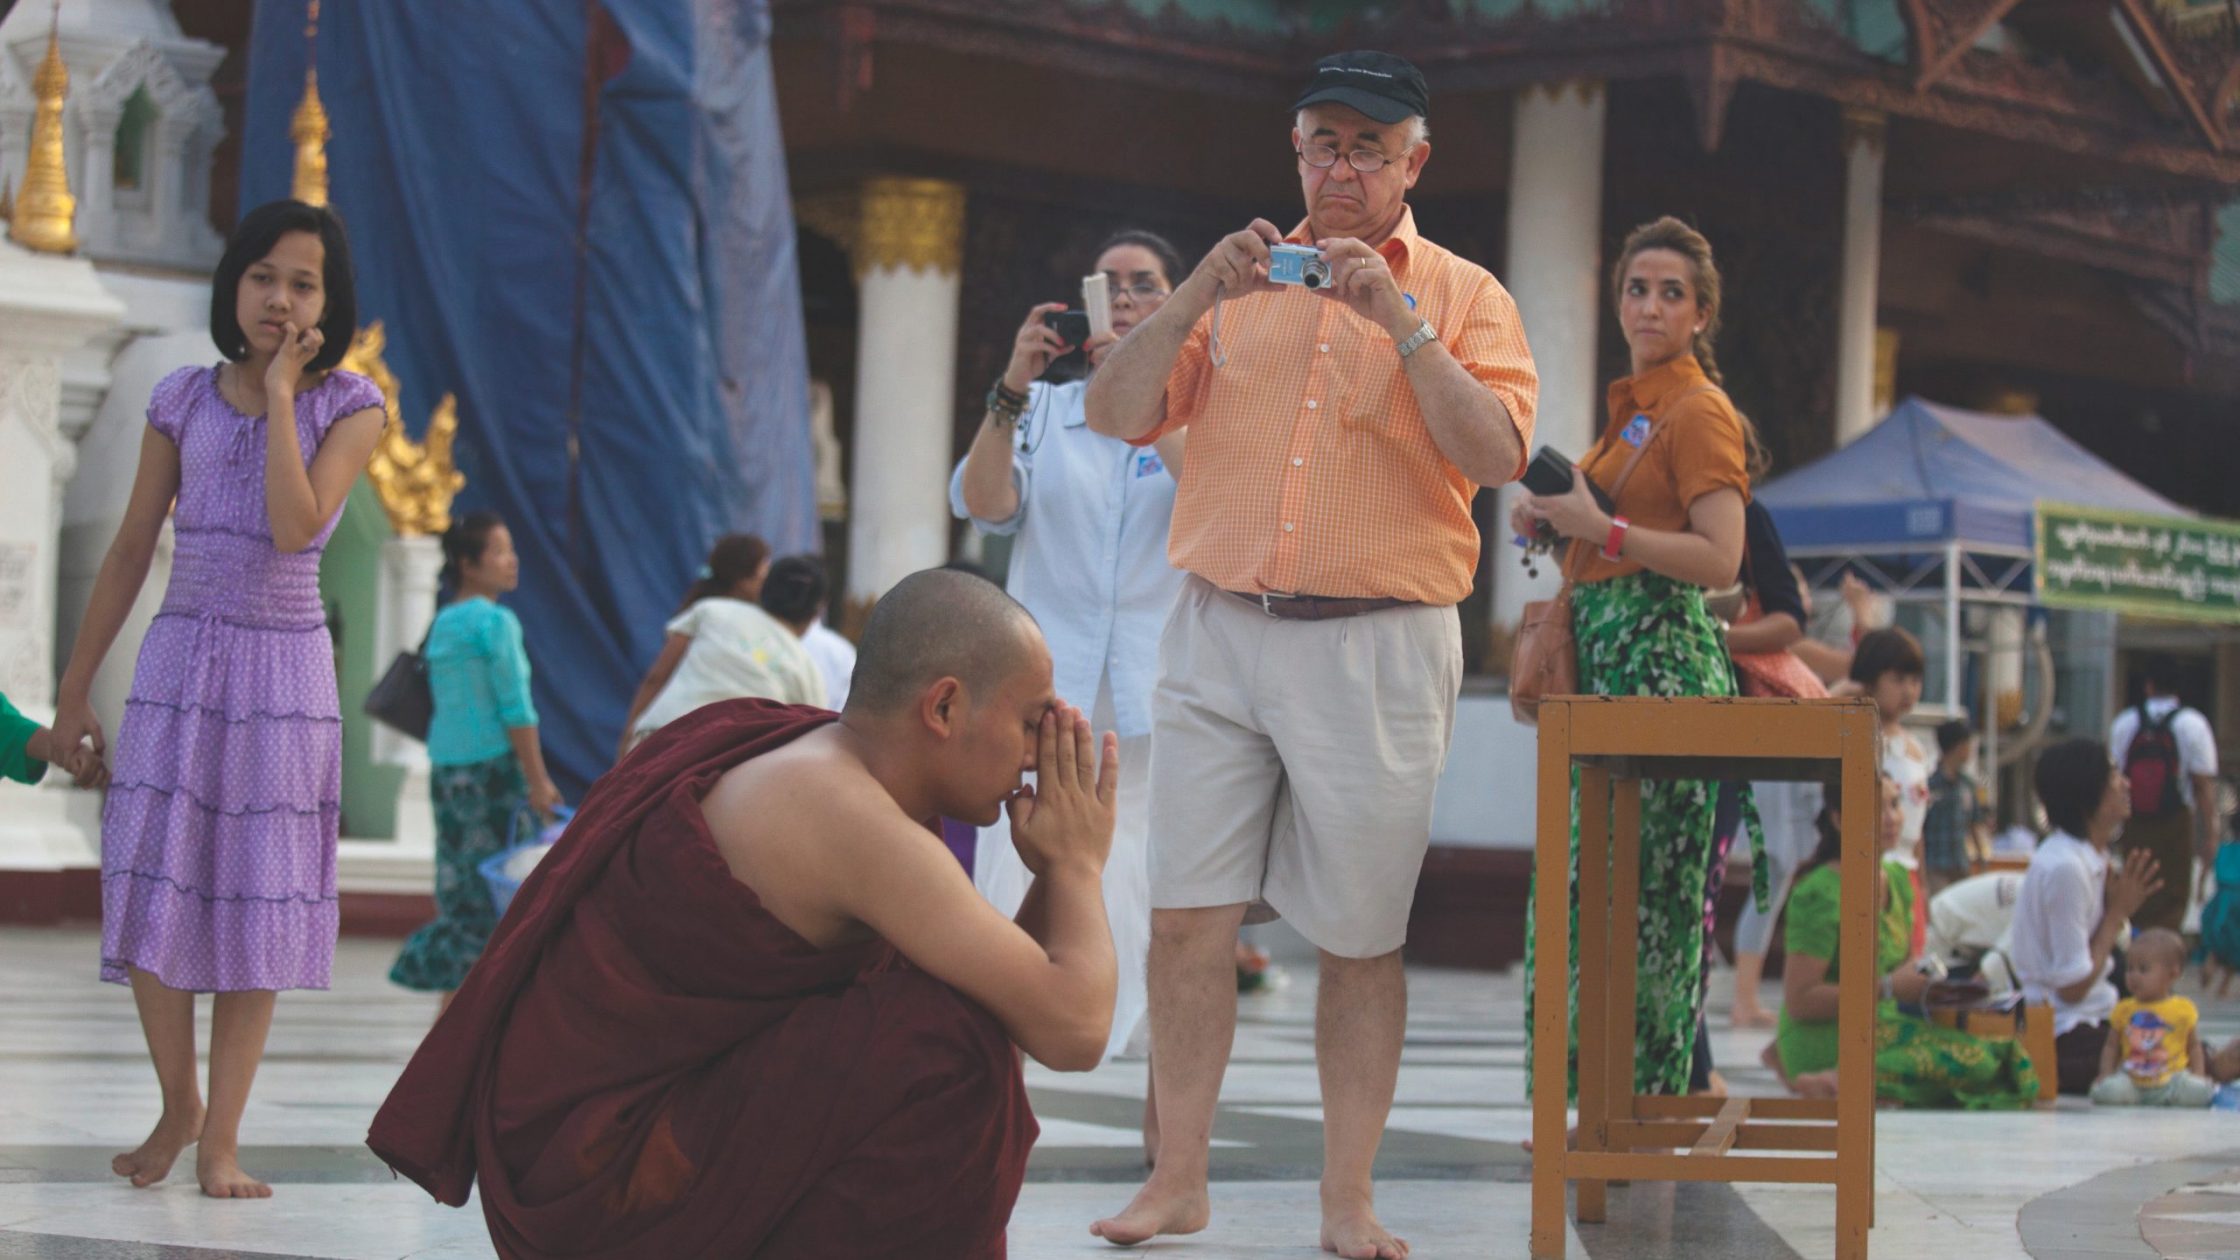 Tourists look at praying Buddhist monk in Burma